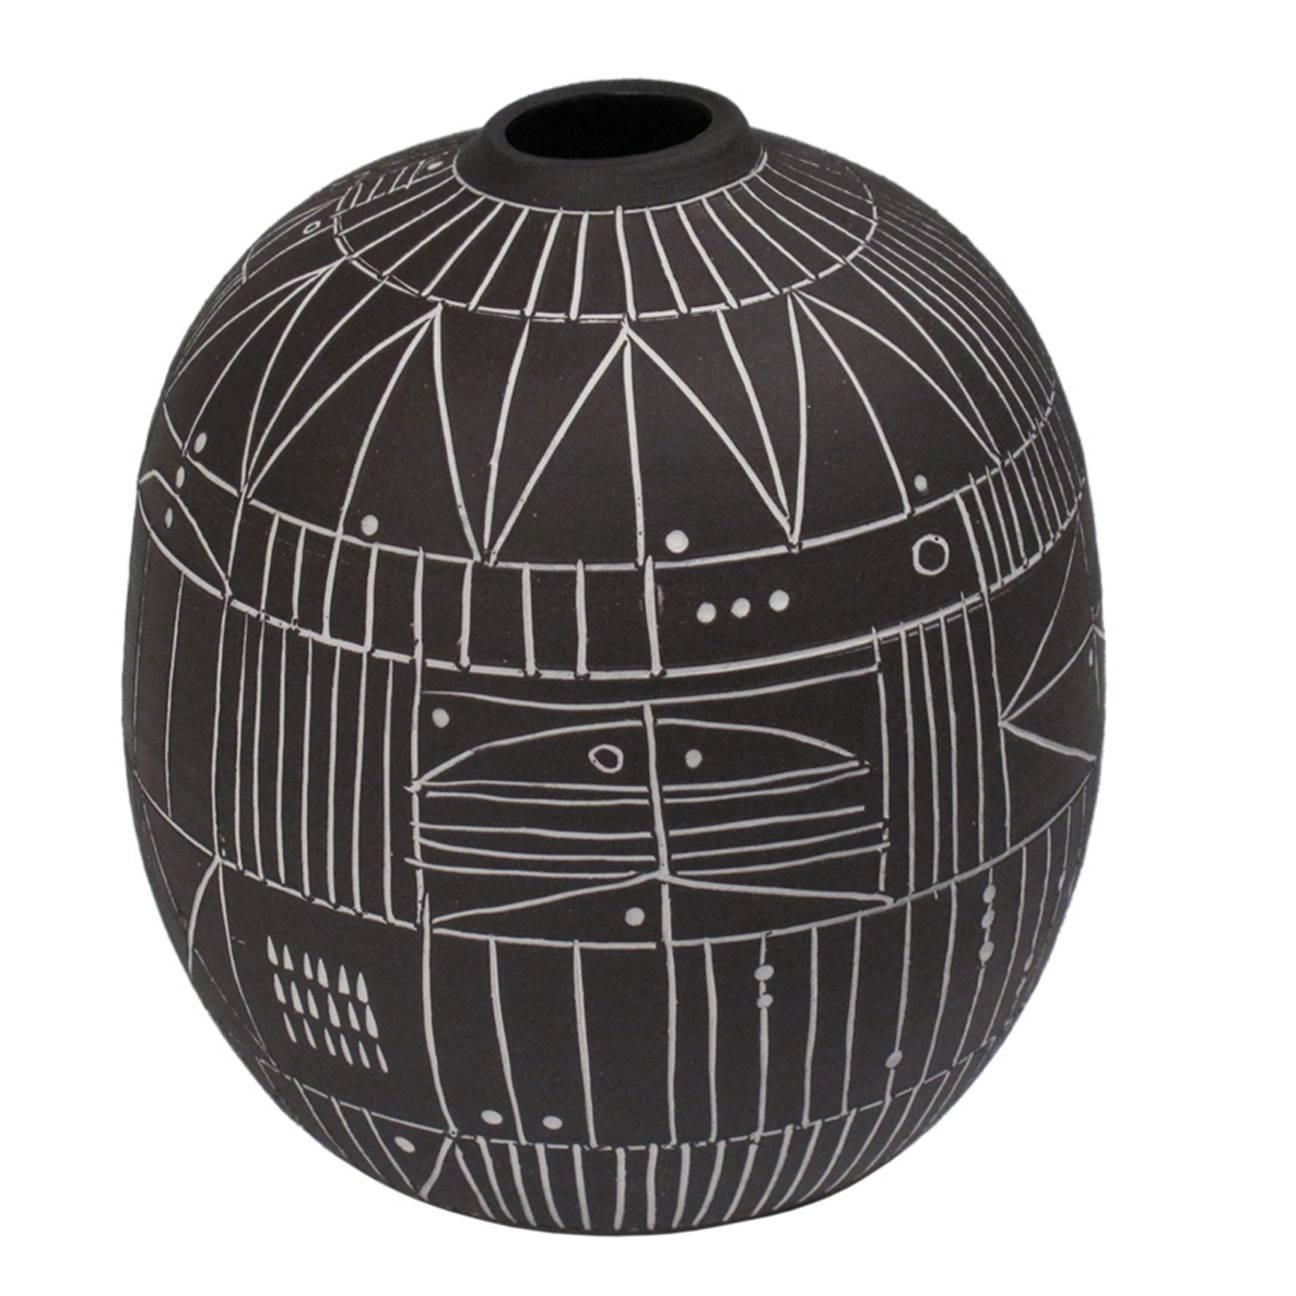 A small incised black and white “Scribe” ceramic vase by LA artist Heather Rosenman. Individually carved, so no two are alike. Sealed on the interior and thus suitable for functional use. Signed by the artist.